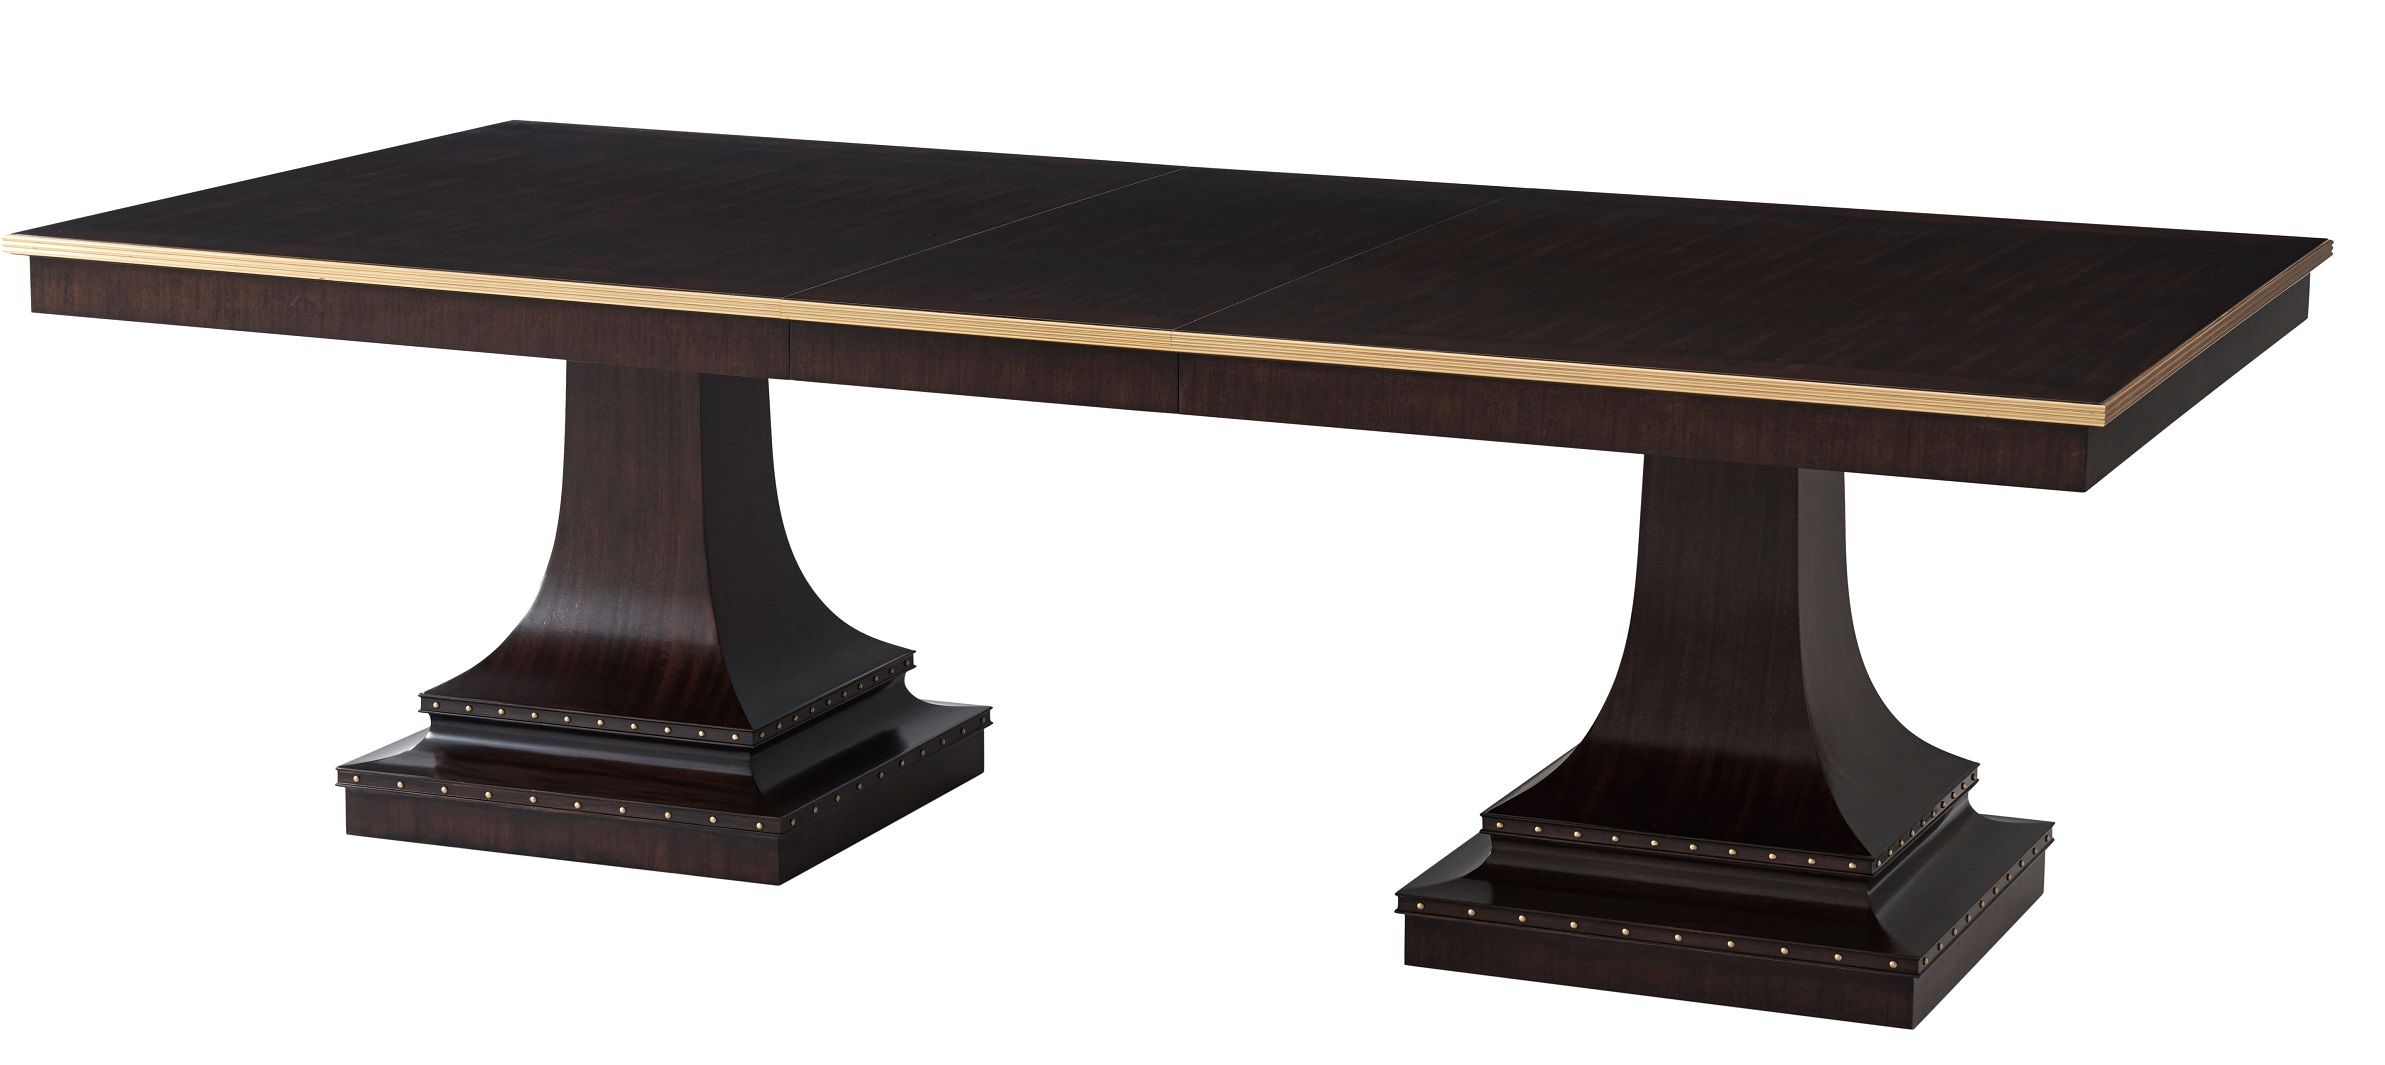 The Siena dining table is inspired by Italy. Mahogany veneer top with Hampton Brass edge